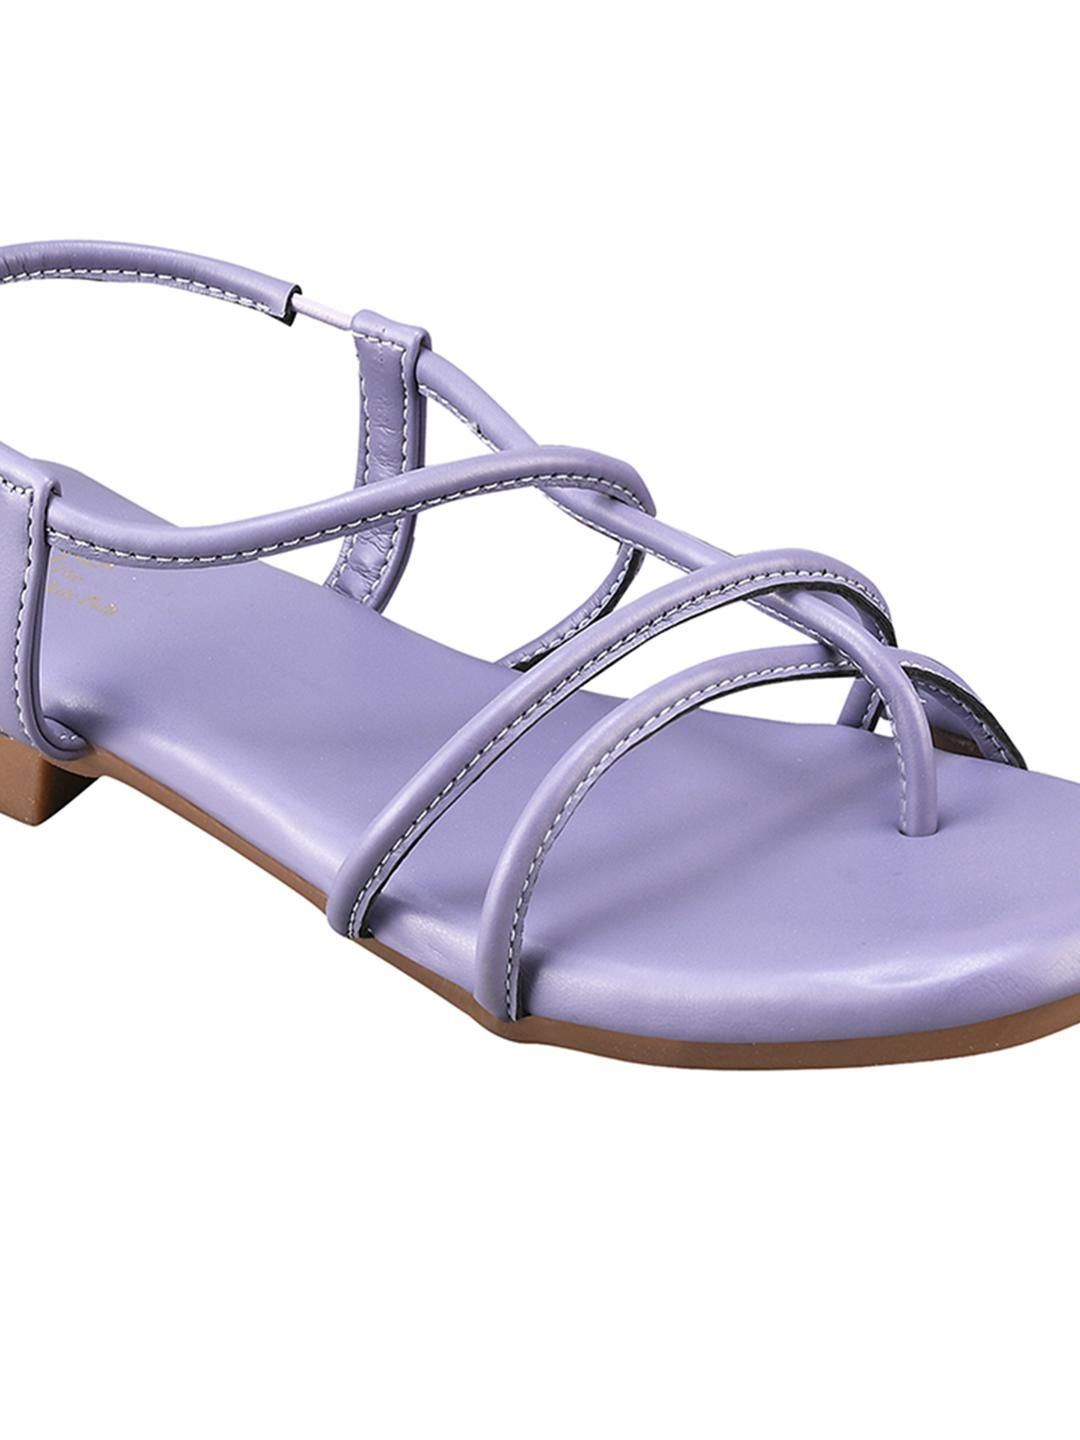 Women's Synthetic Sandals